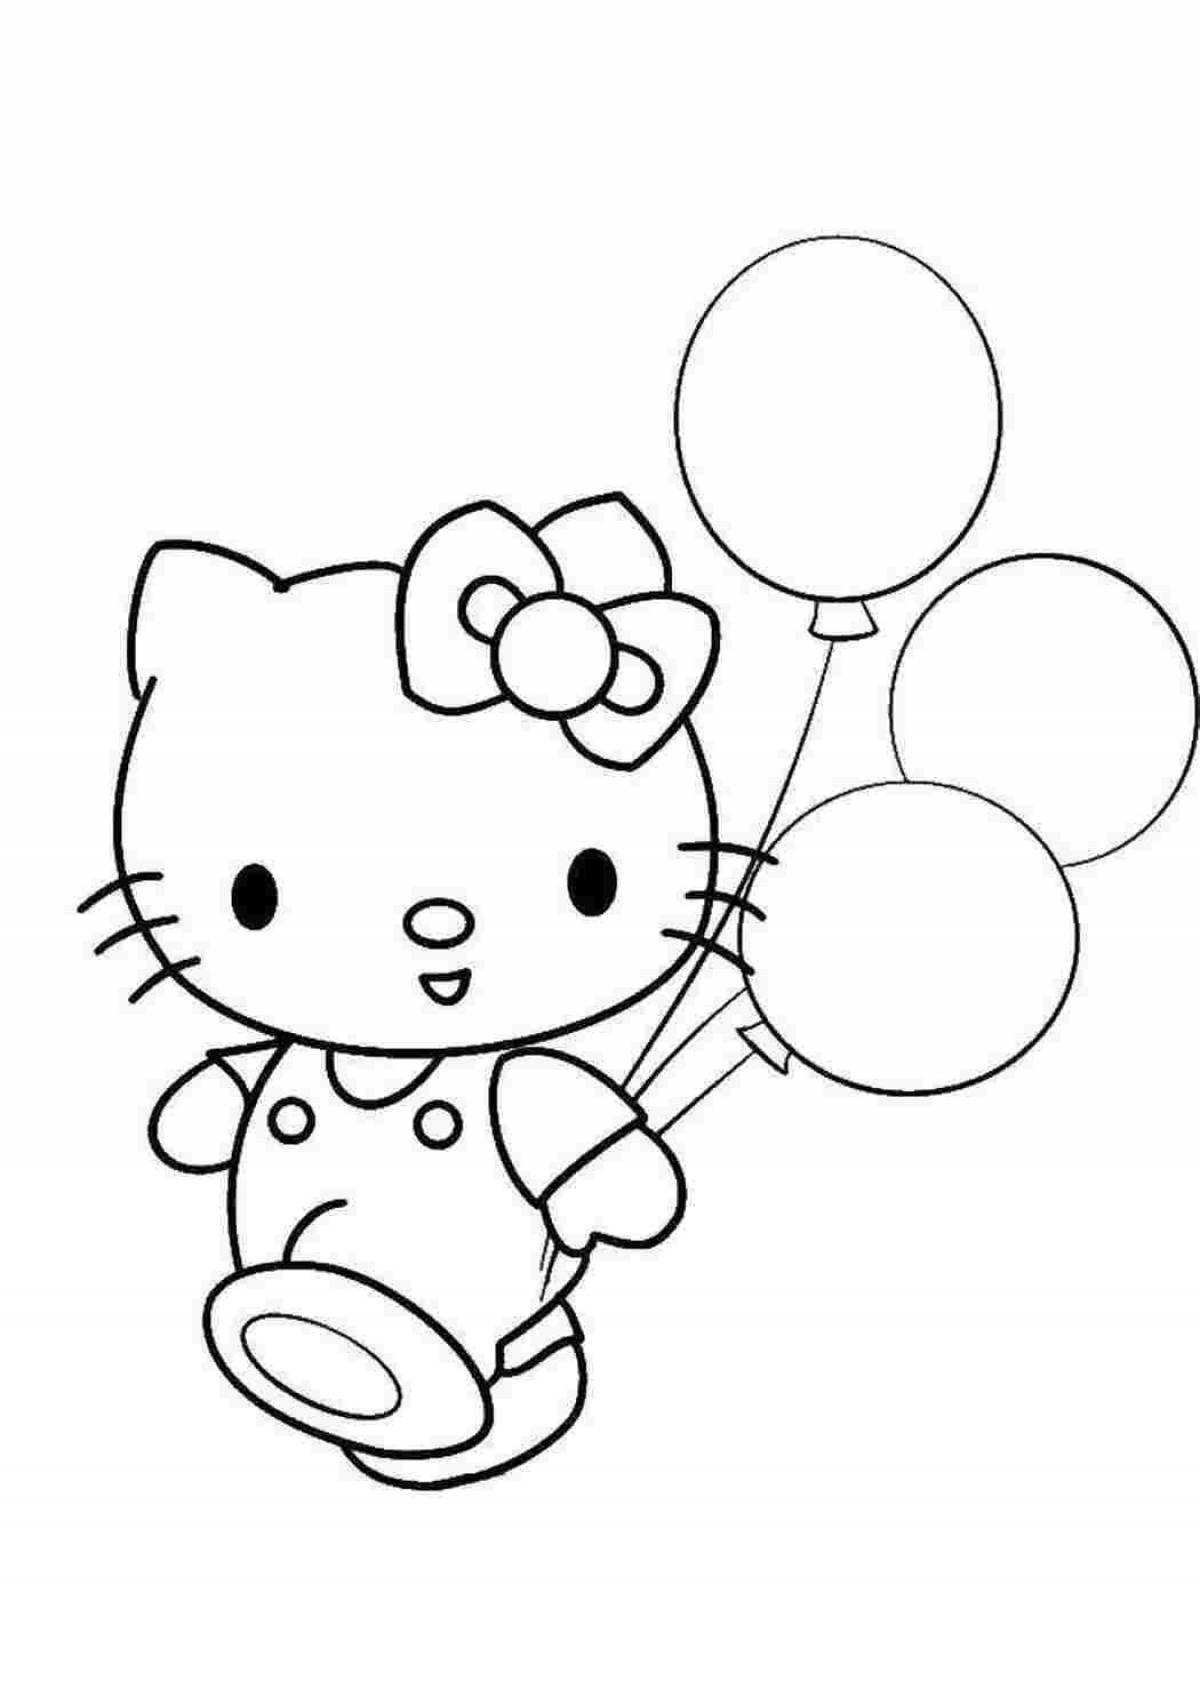 Shining hello kitty with heart coloring book